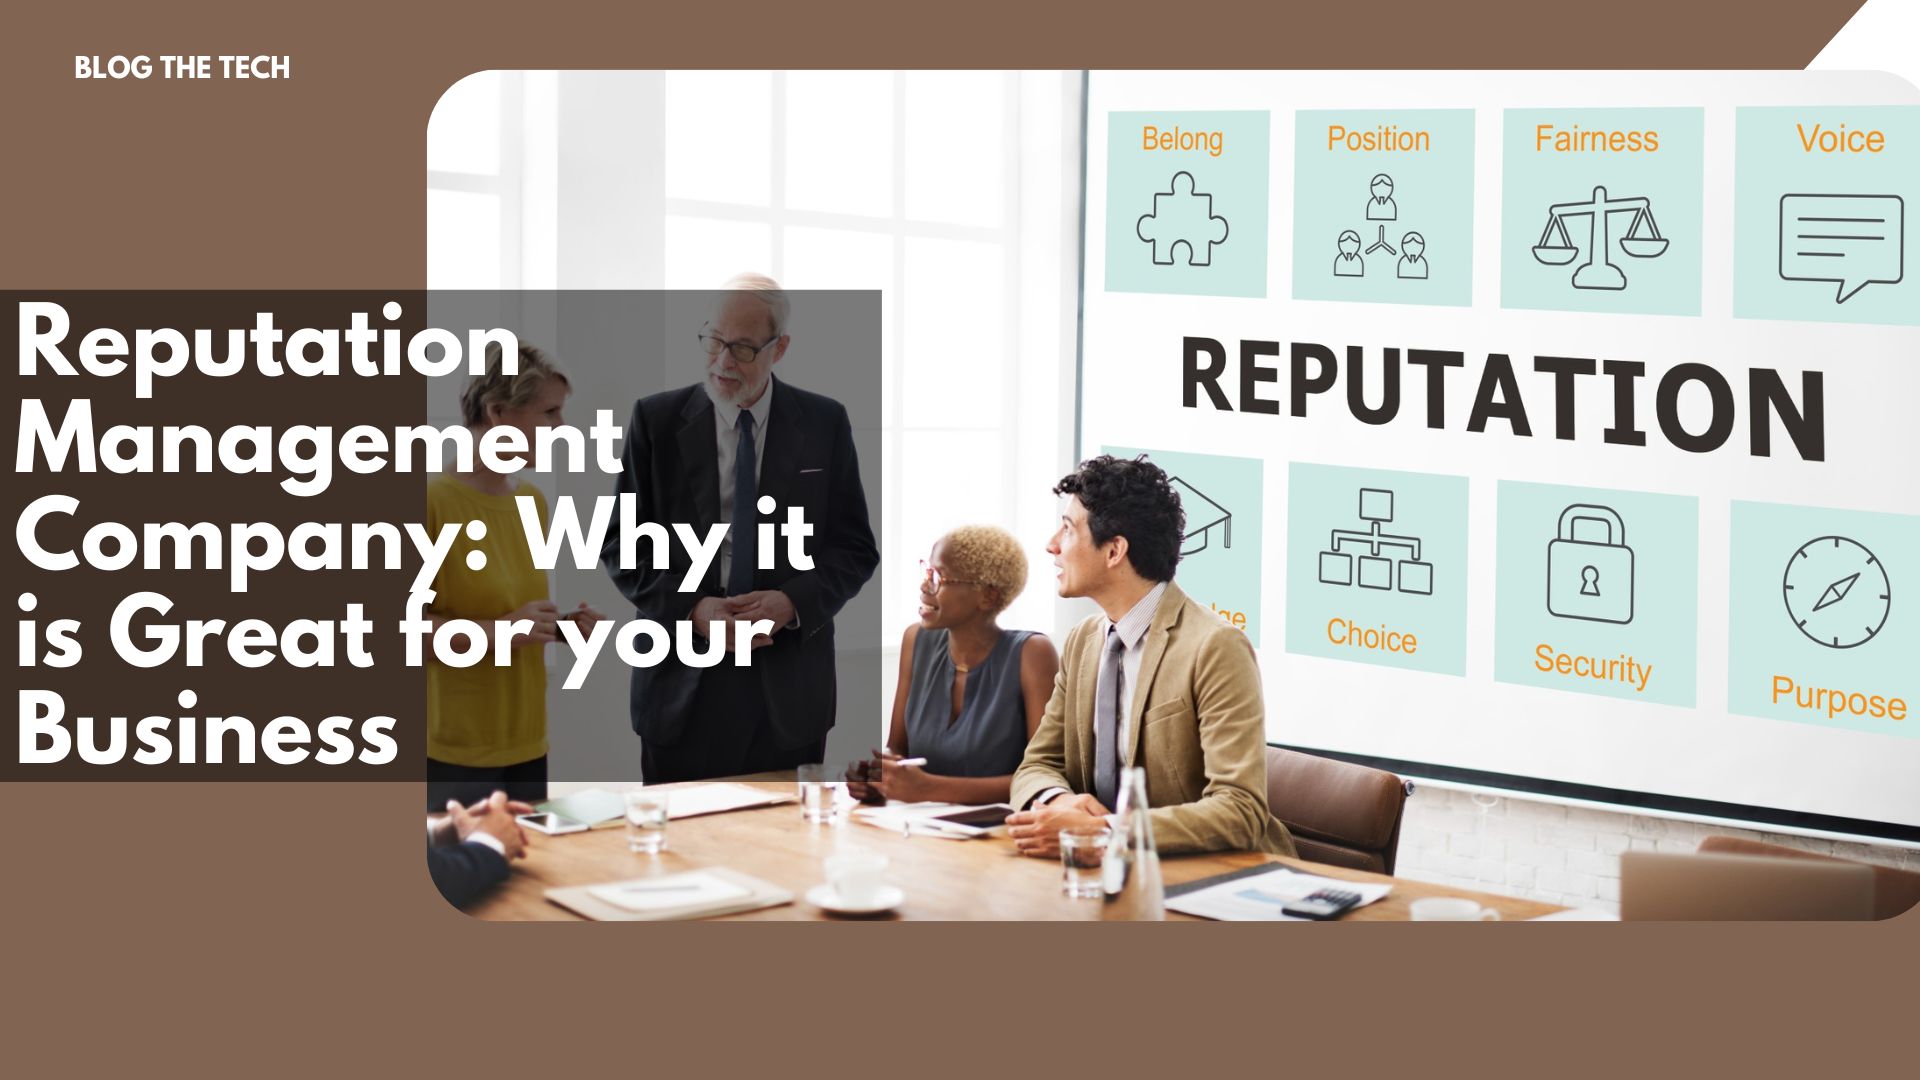 Reputation Management Company: Why it is Great for your Business